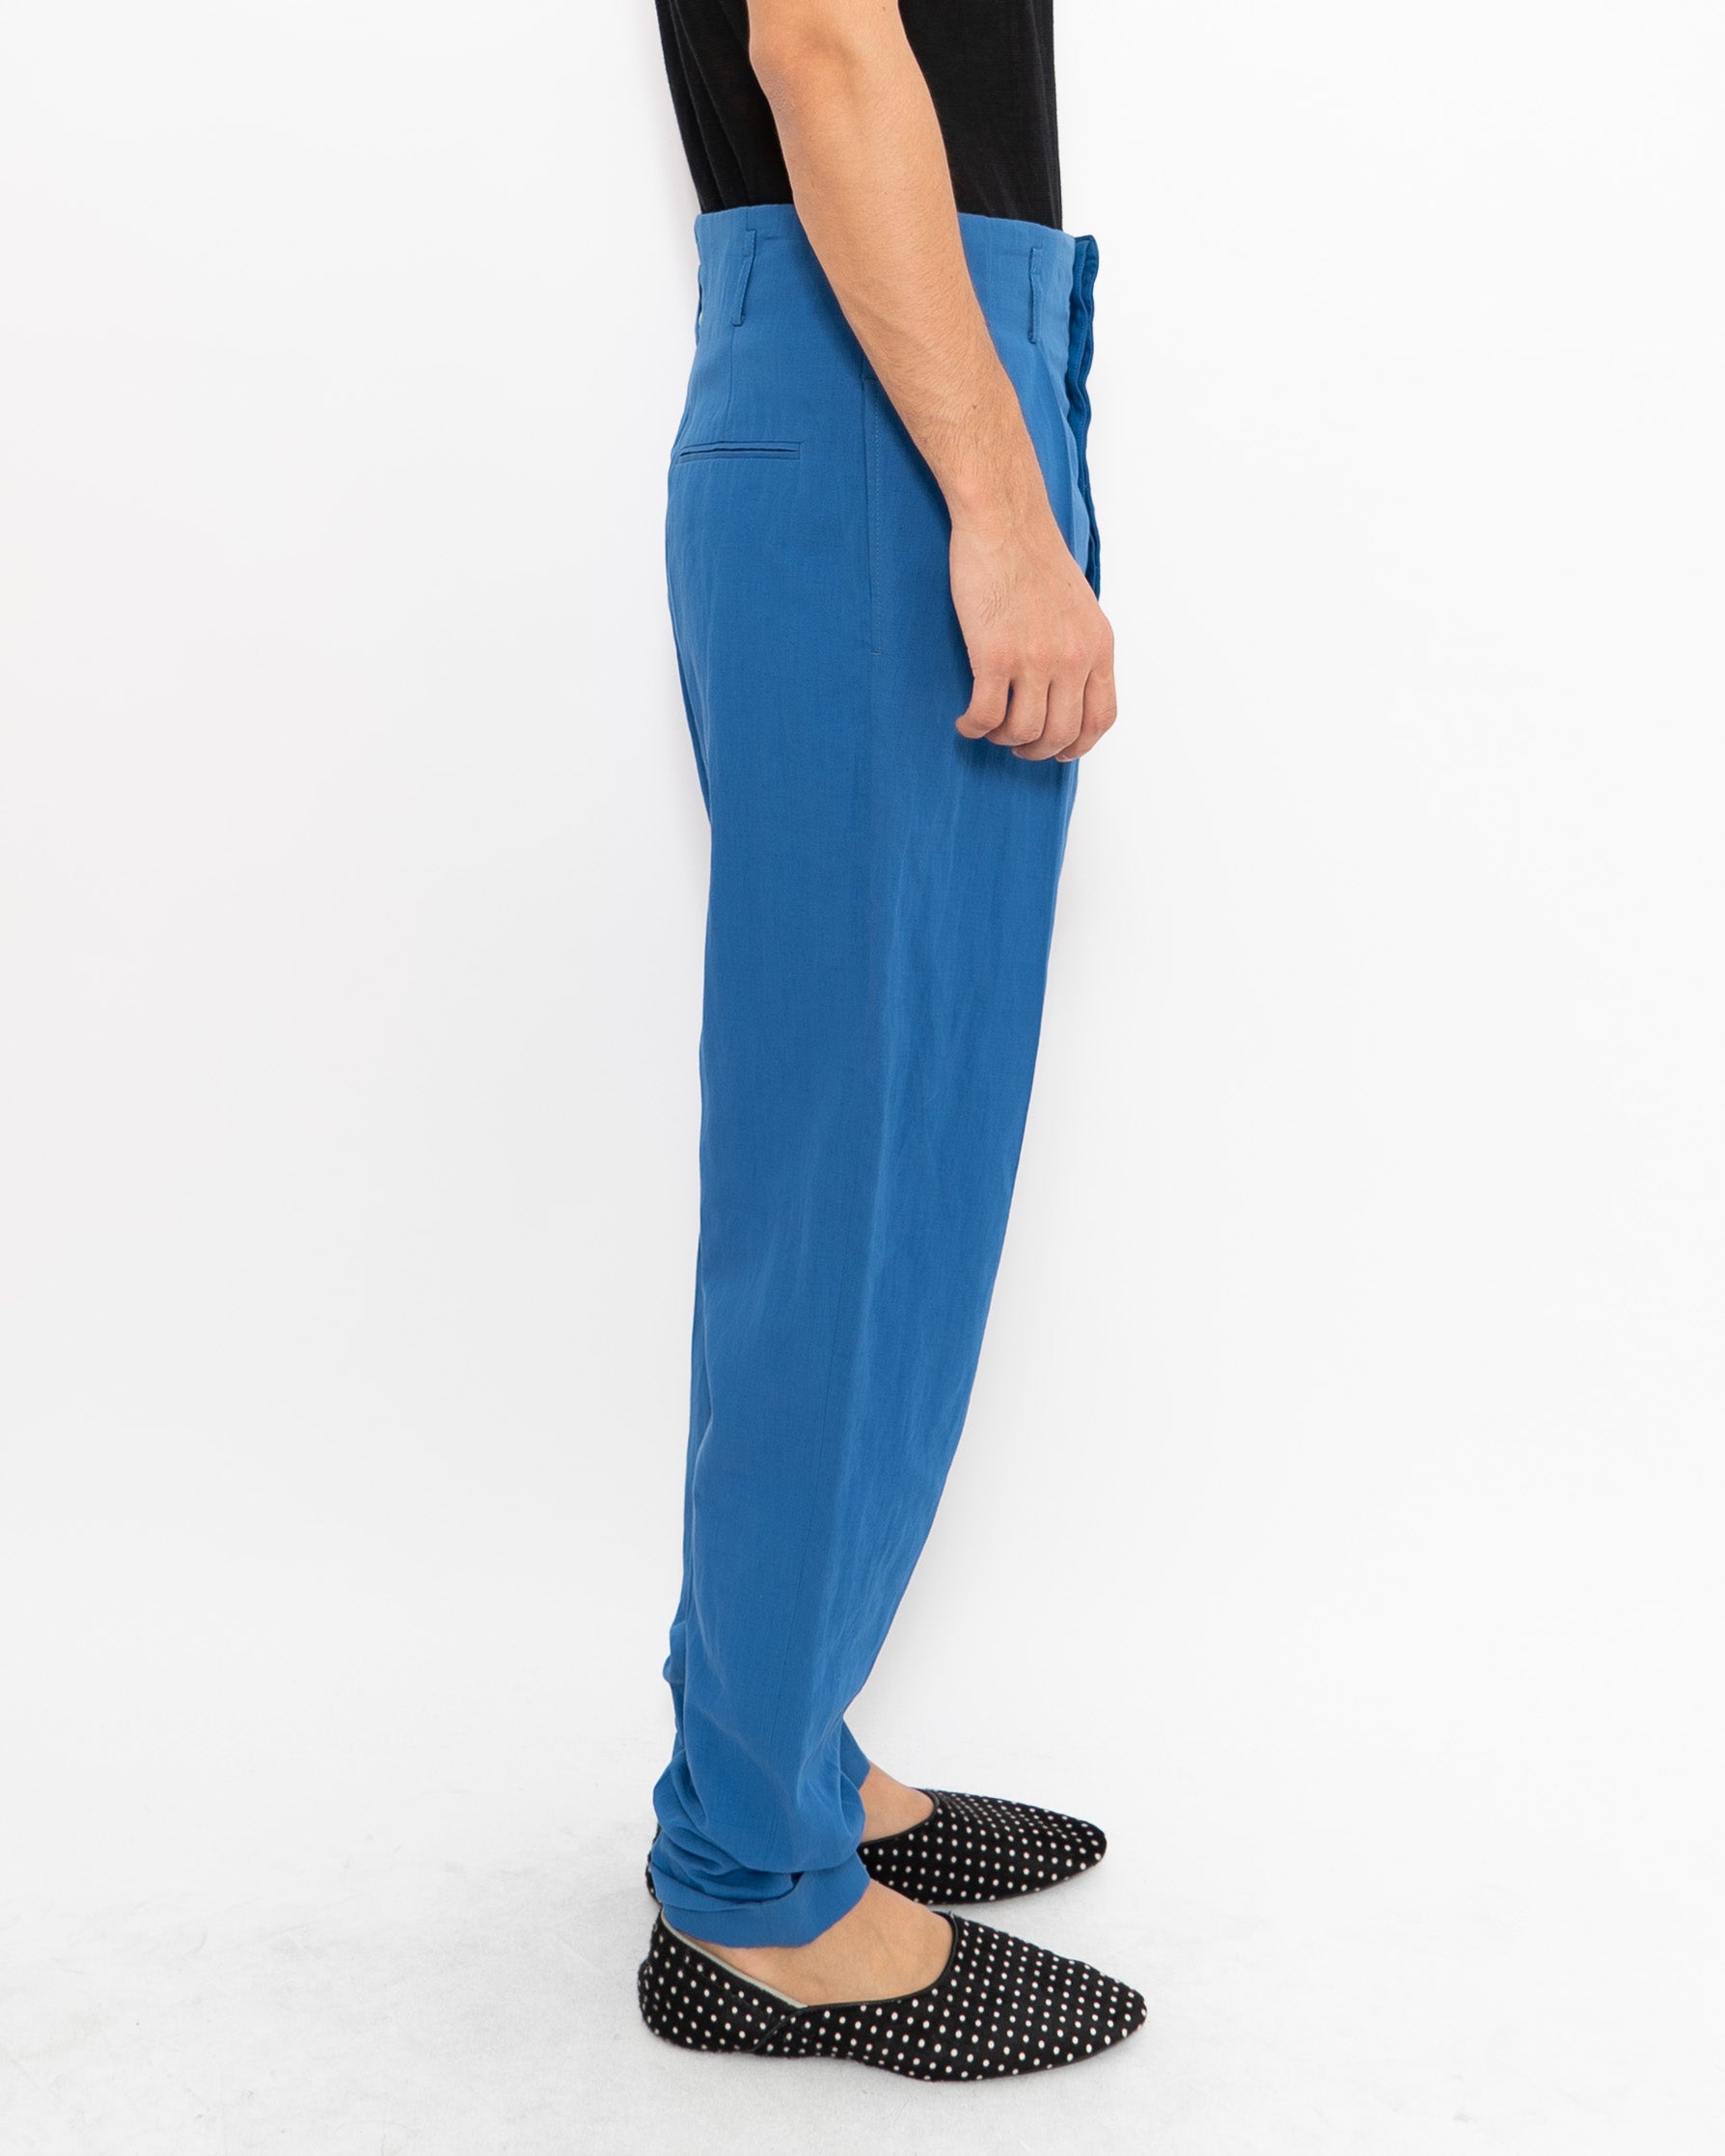 SS19 Brighton Blue Pleated Trousers Sample